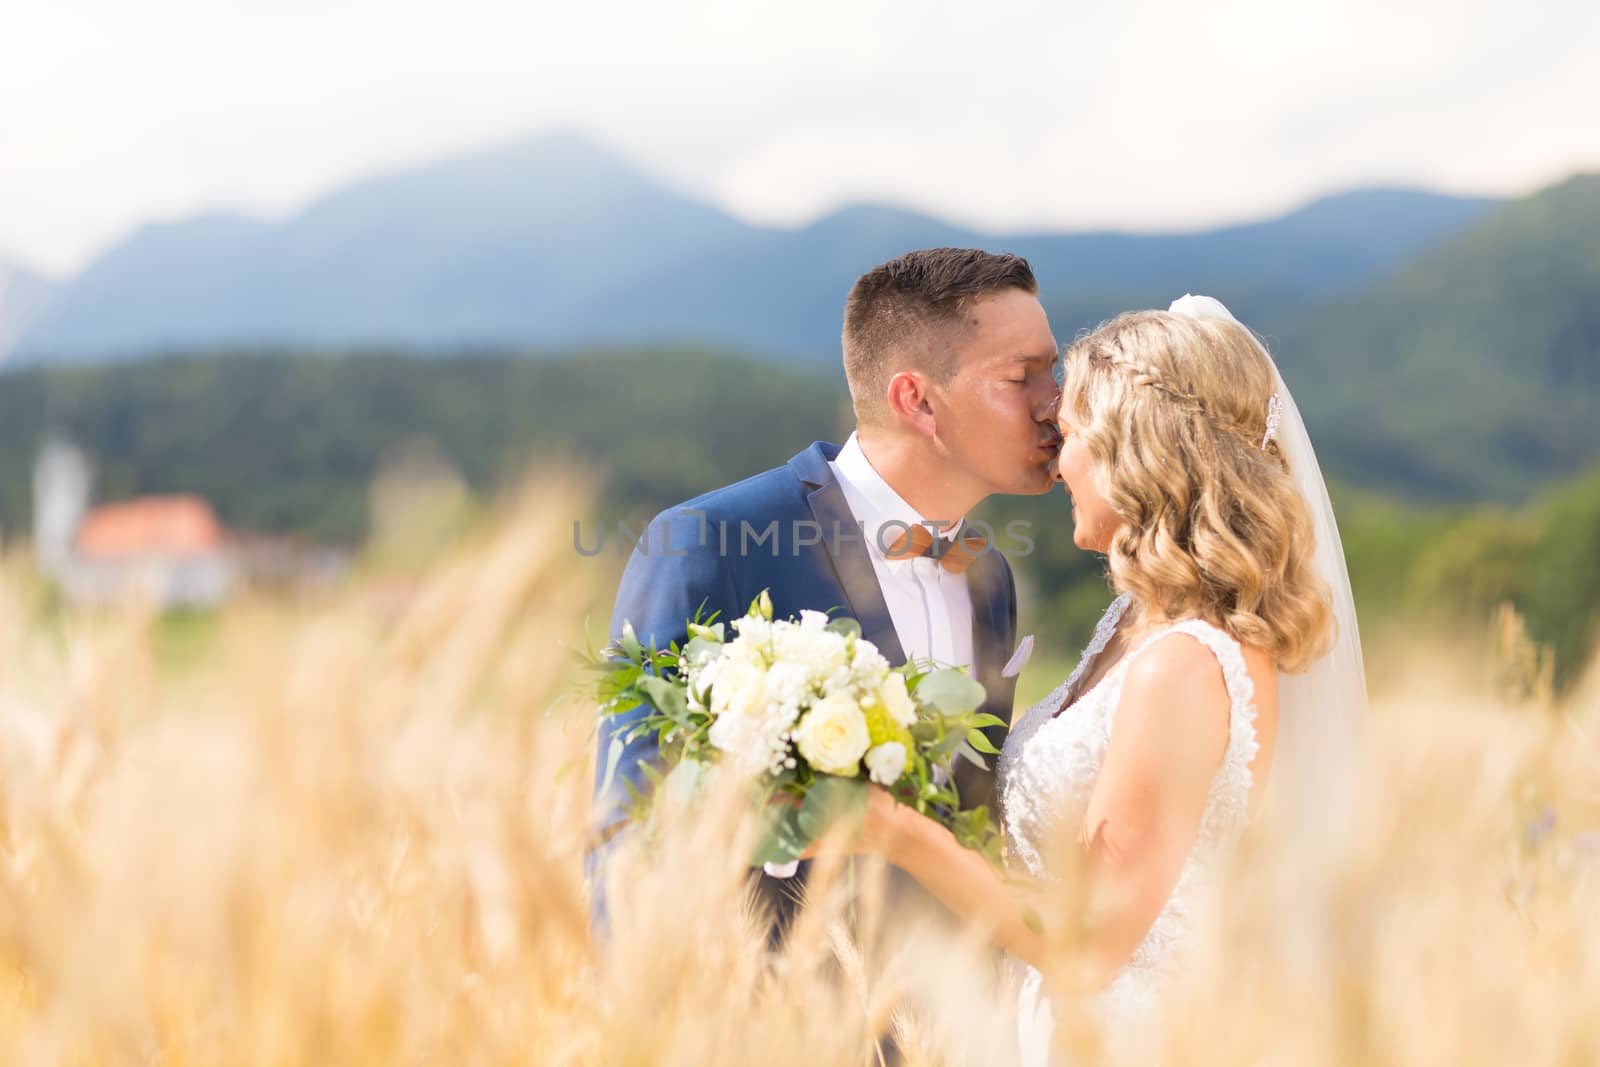 Groom hugging bride tenderly and kisses her on forehead in wheat field somewhere in Slovenian countryside. Caucasian happy romantic young couple celebrating their marriage.